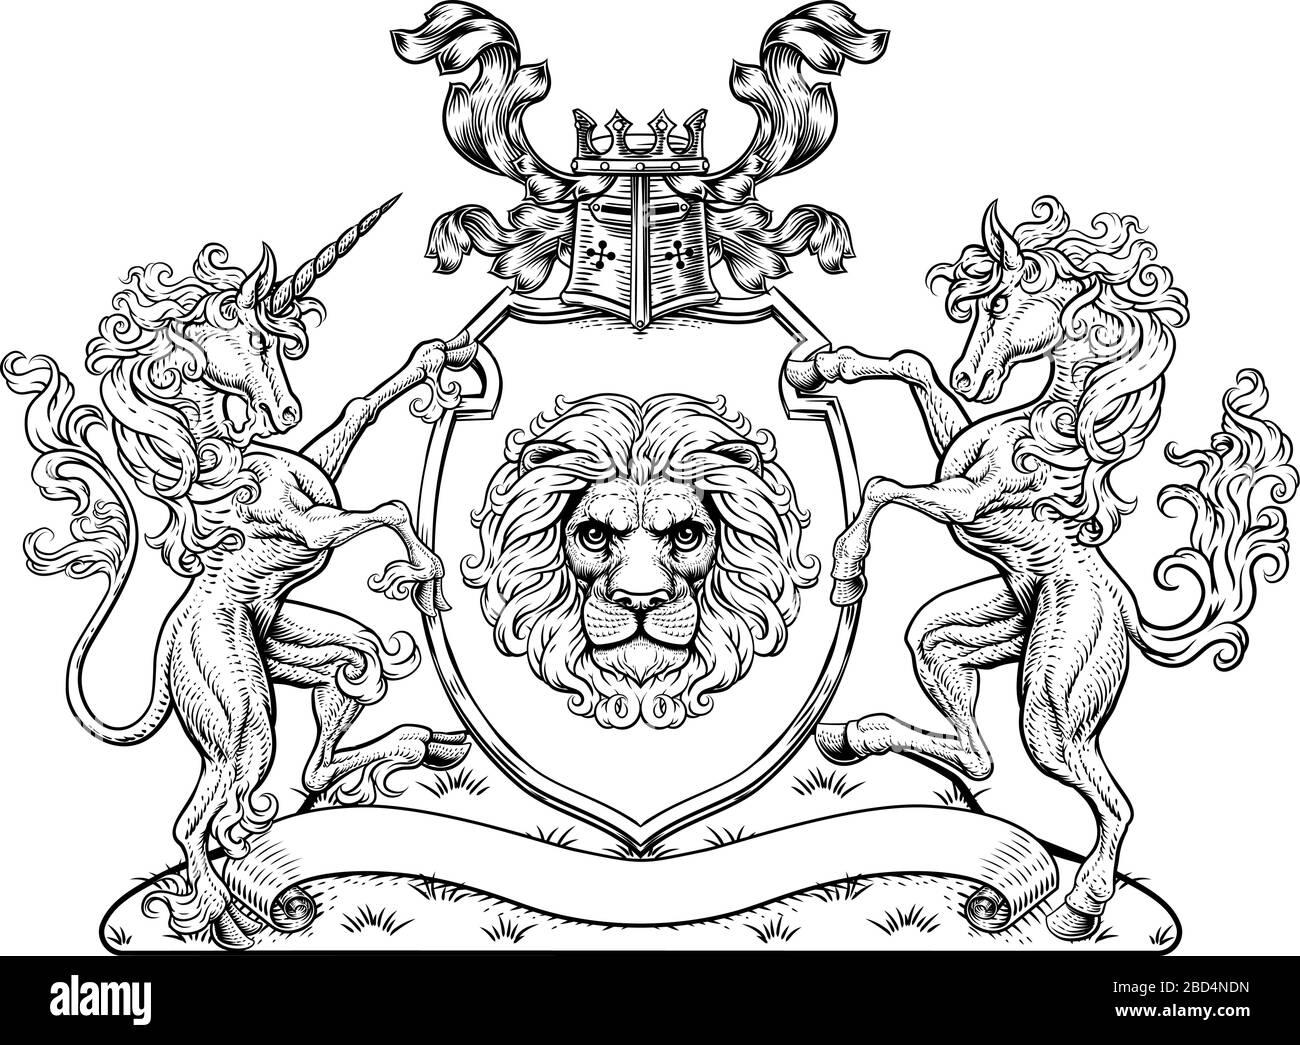 Crest Horse Unicorn Coat of Arms Lion Shield Seal Stock Vector